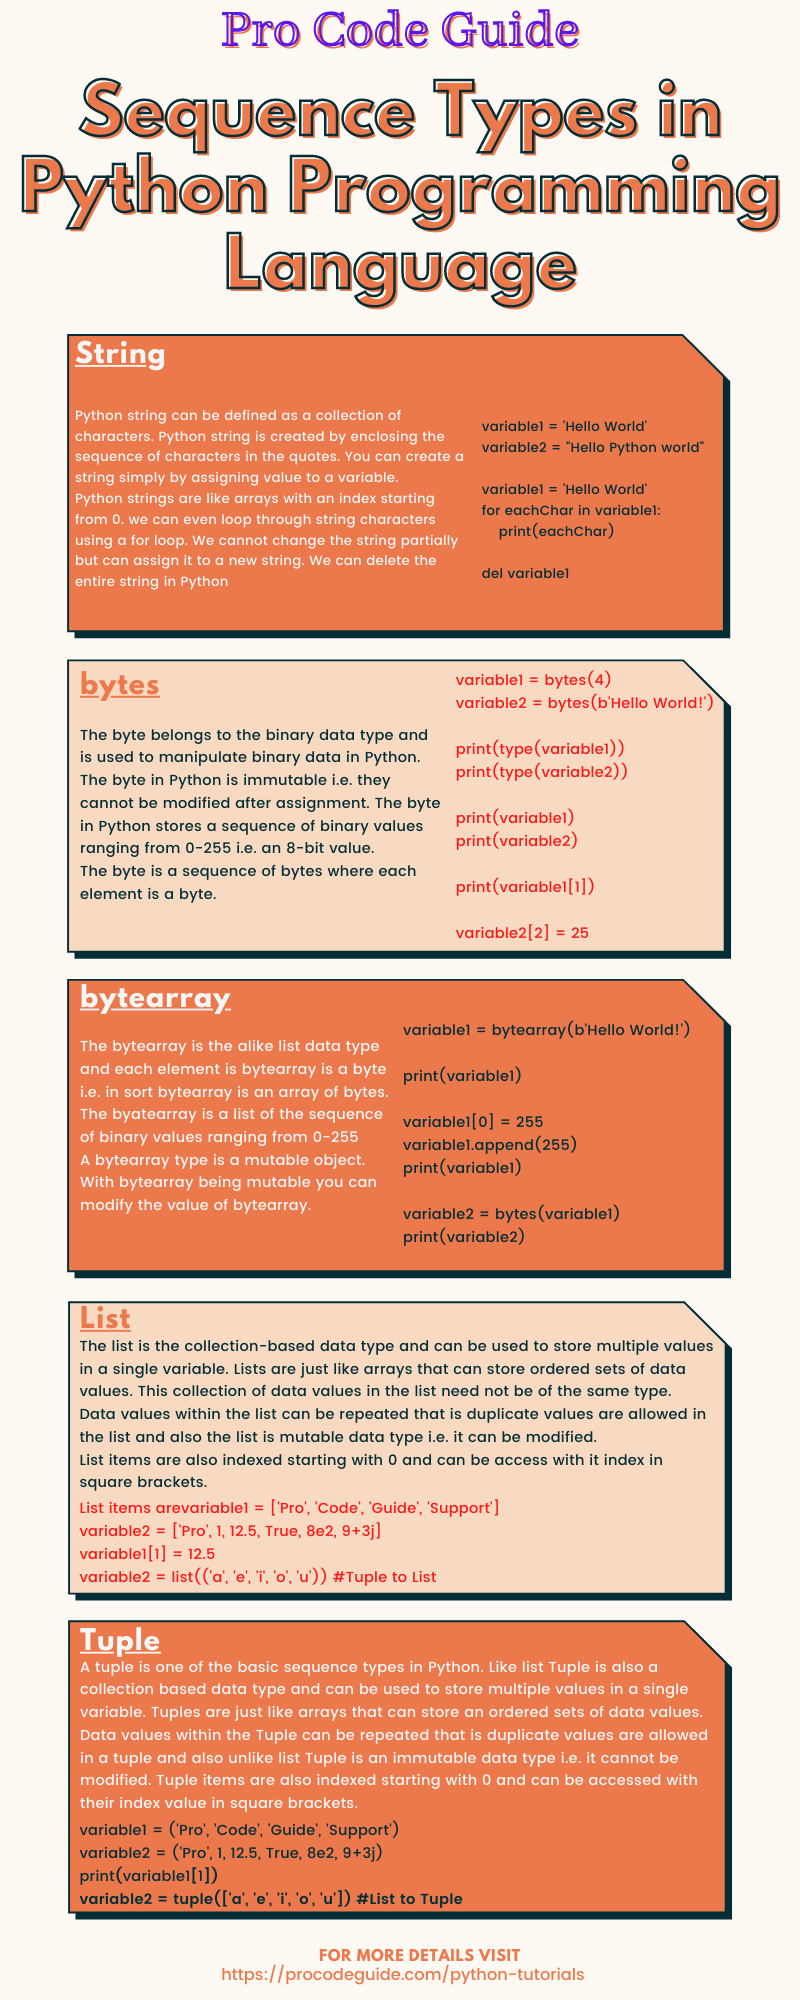 Sequence Types in Python Programming Language - Infographic